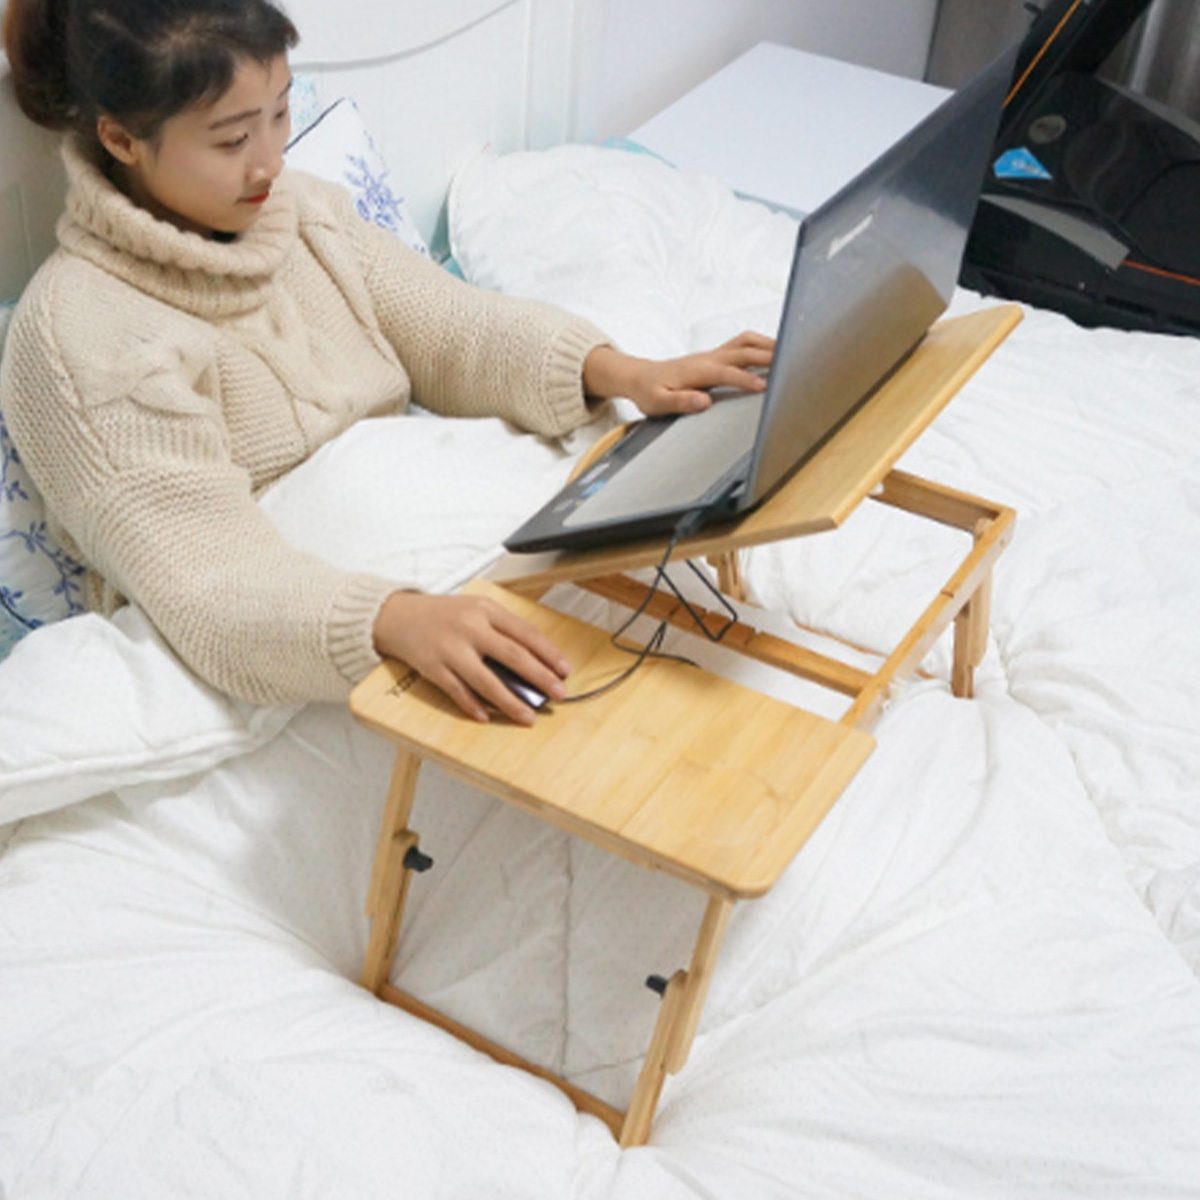 Portable-Bamboo-Laptop-Bed-Desk-Table-Foldable-Workstation-Tray-Lap-Fold-1719036-7